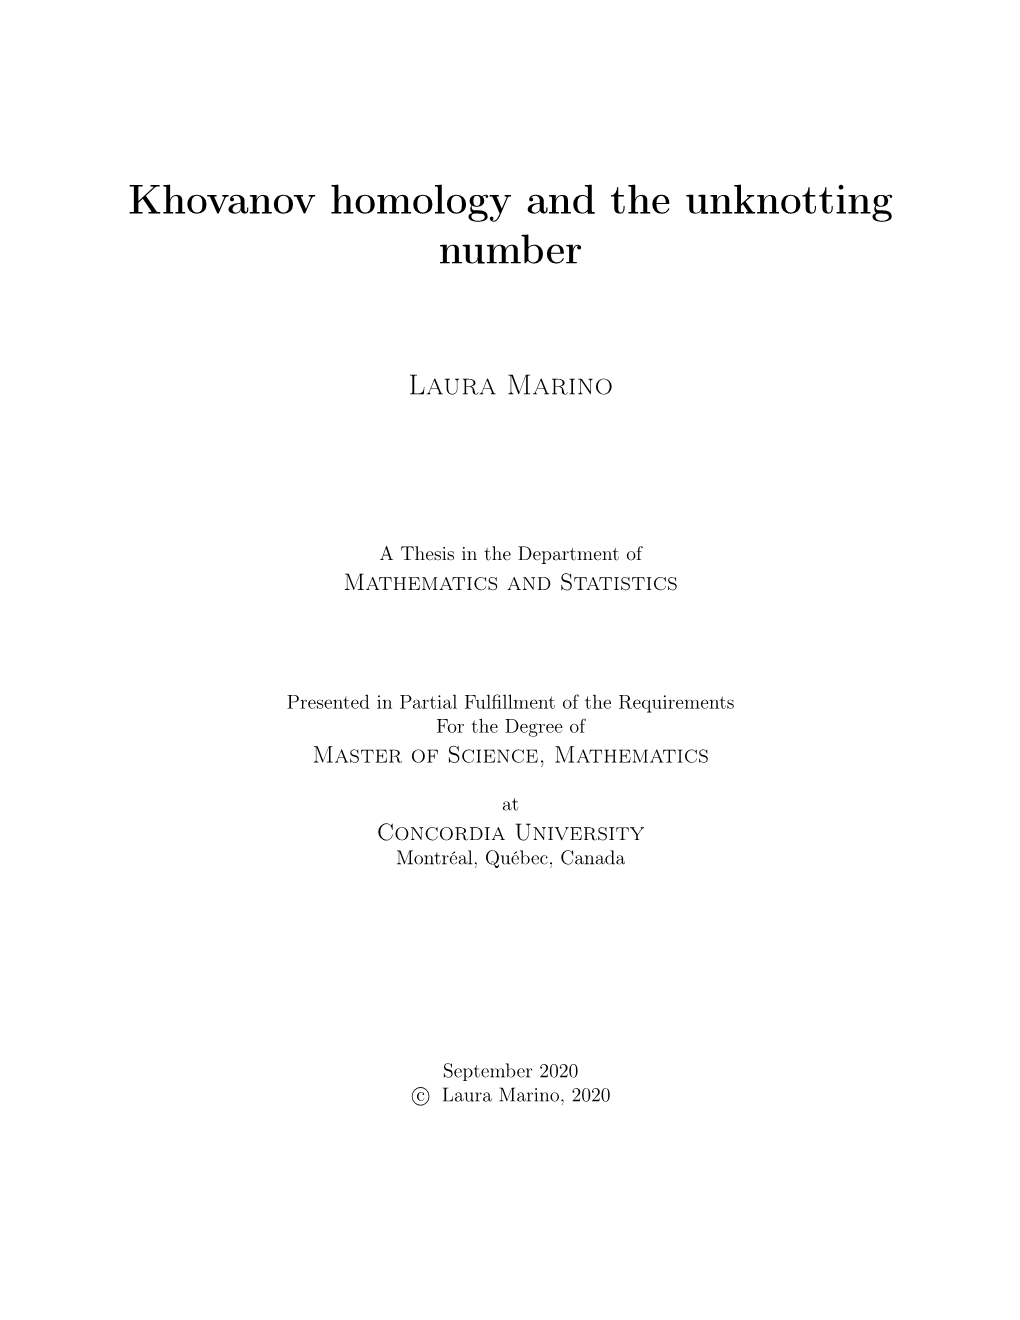 Khovanov Homology and the Unknotting Number